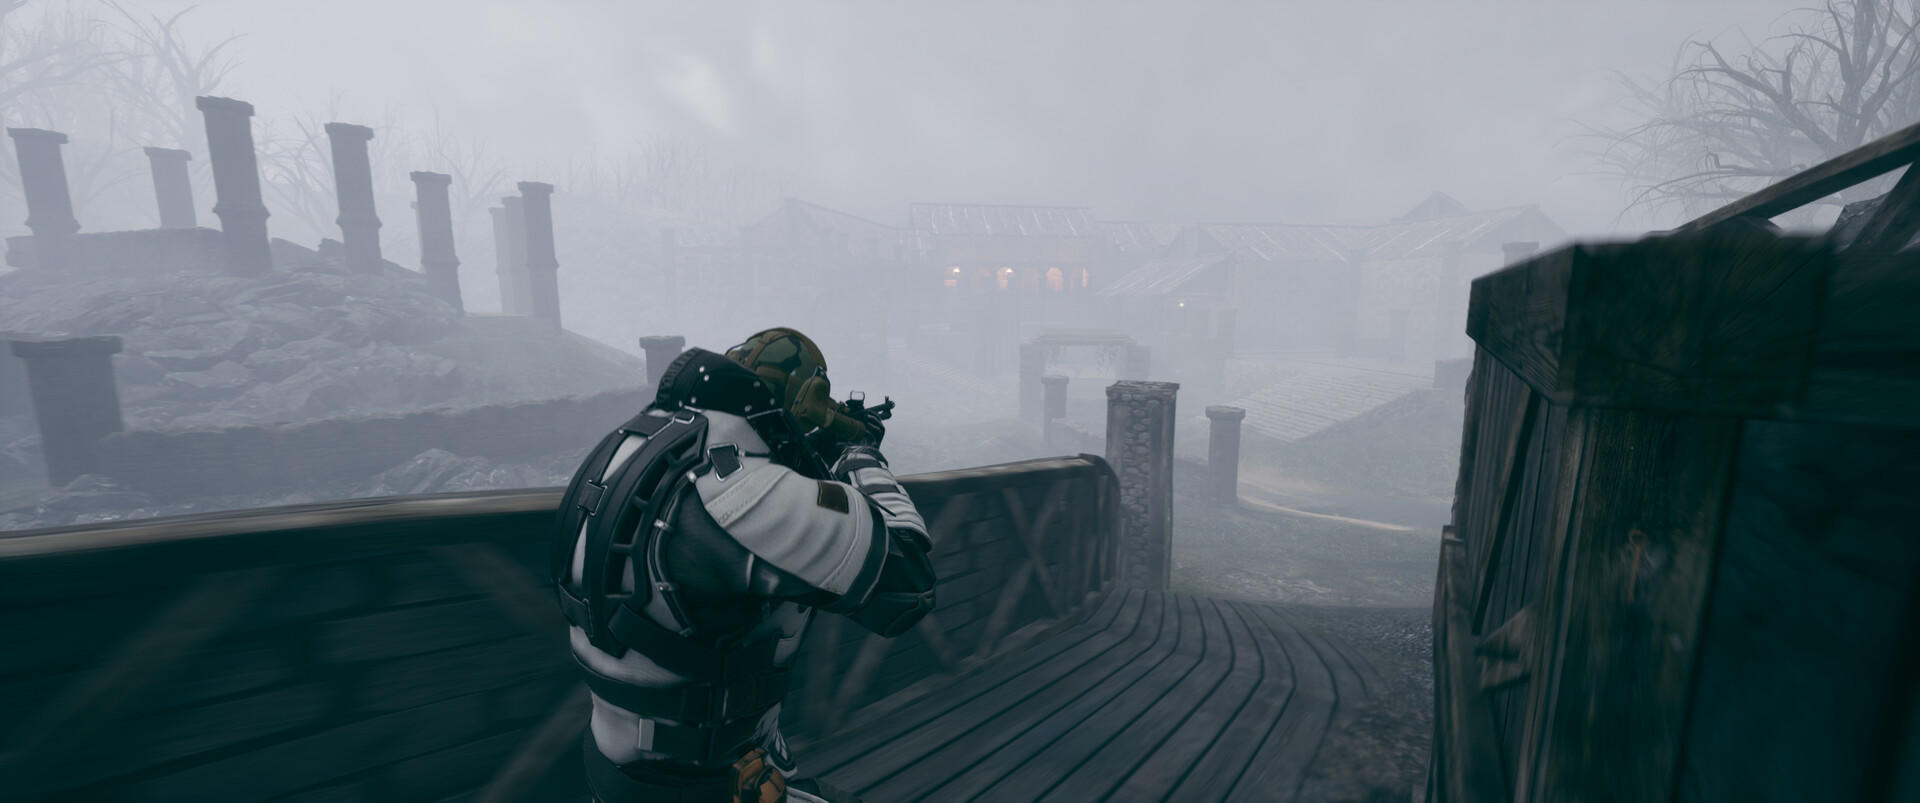 Shadows of Soldiers screenshot game